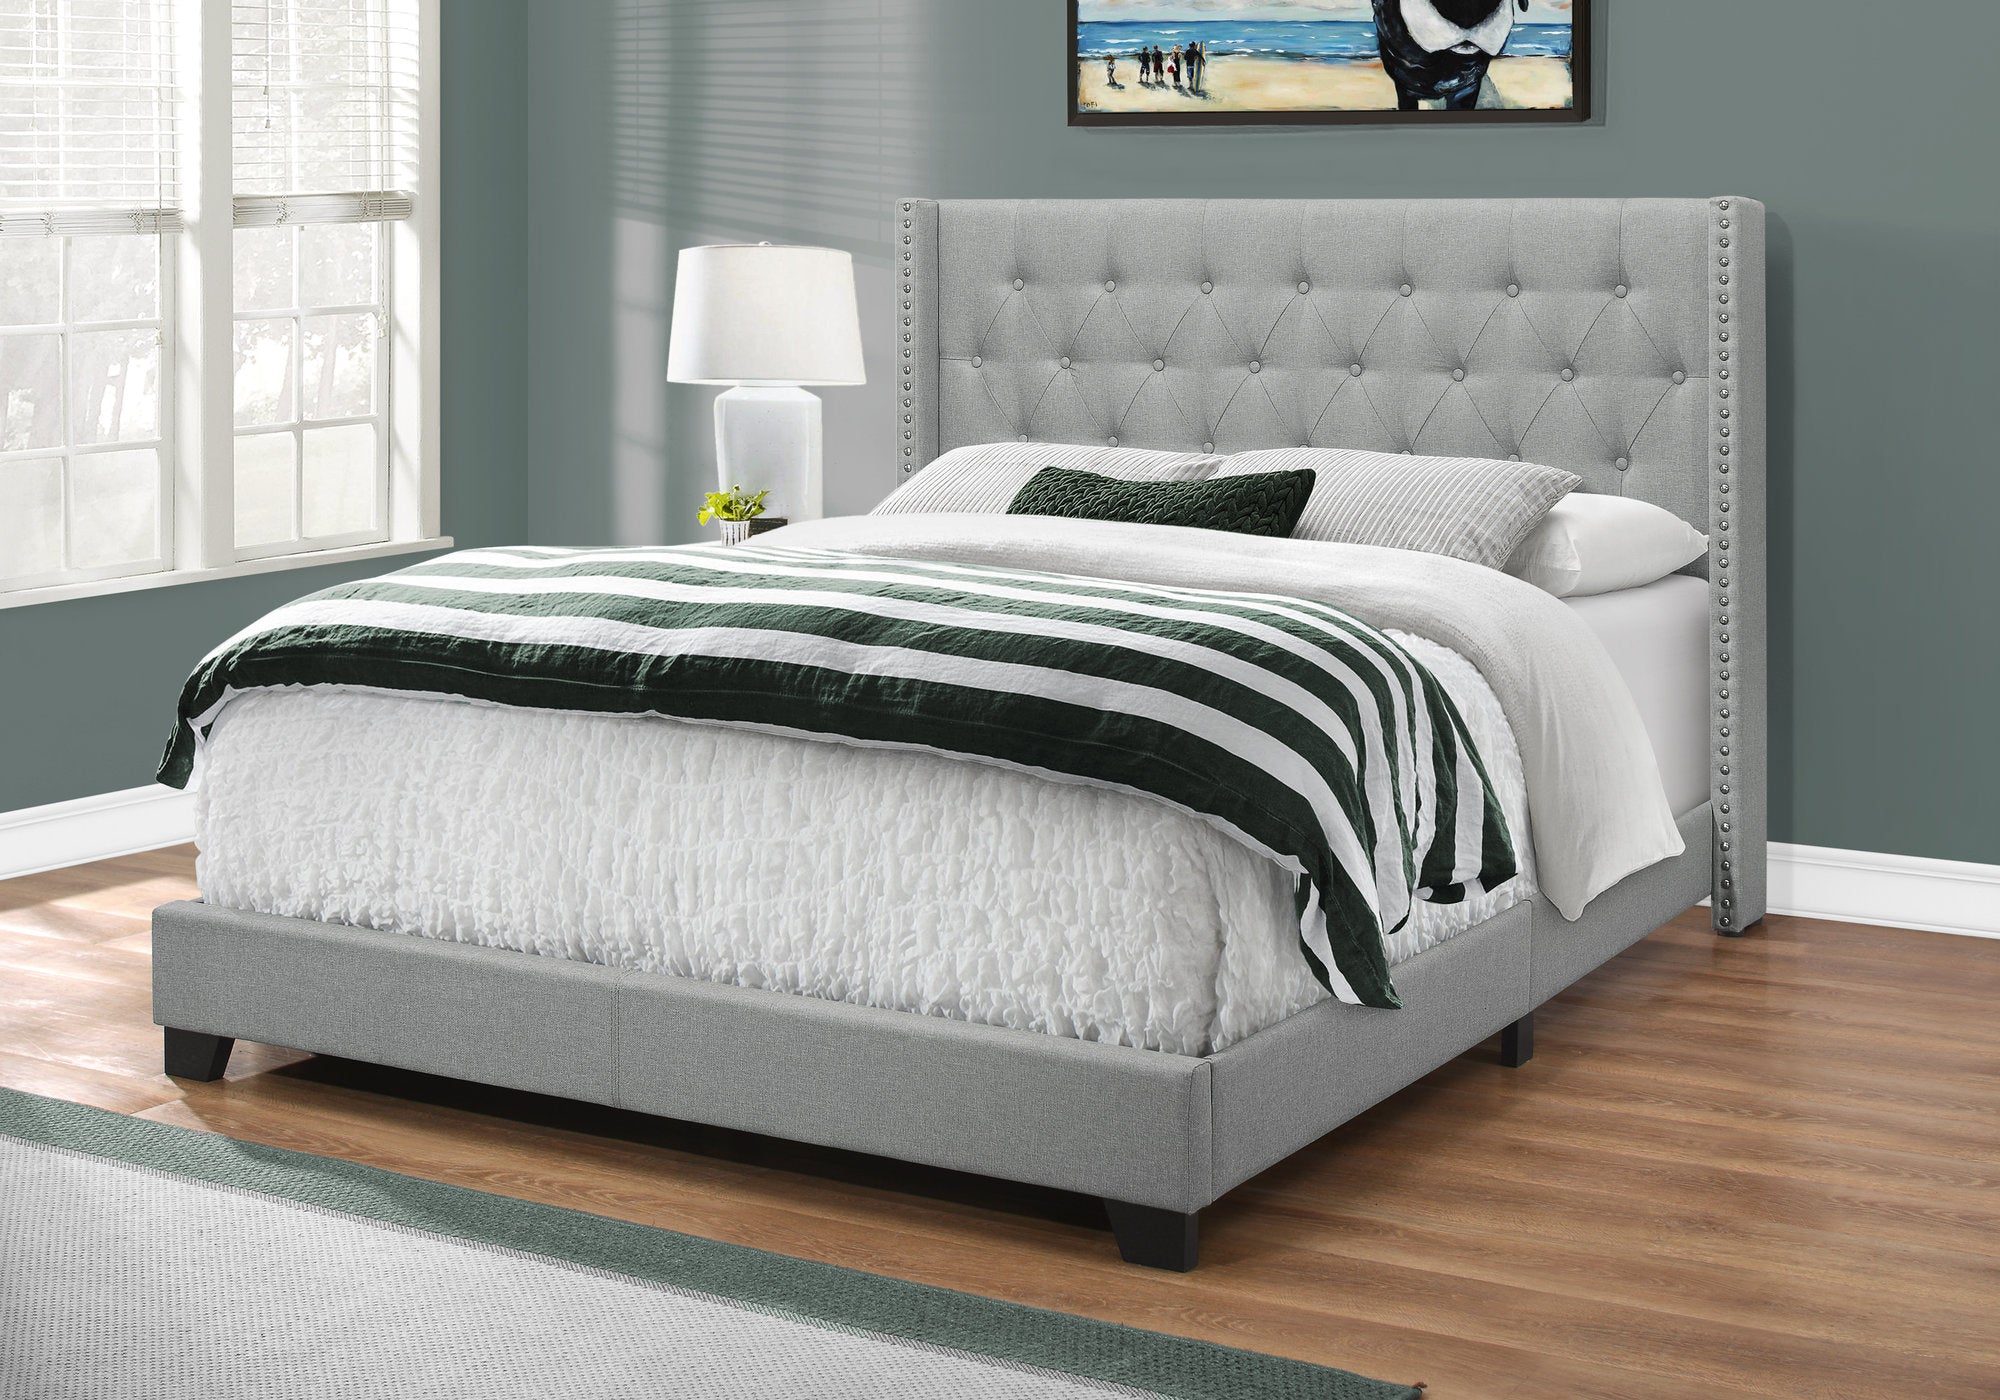 bed queen size grey linen with chrome trim i5984q